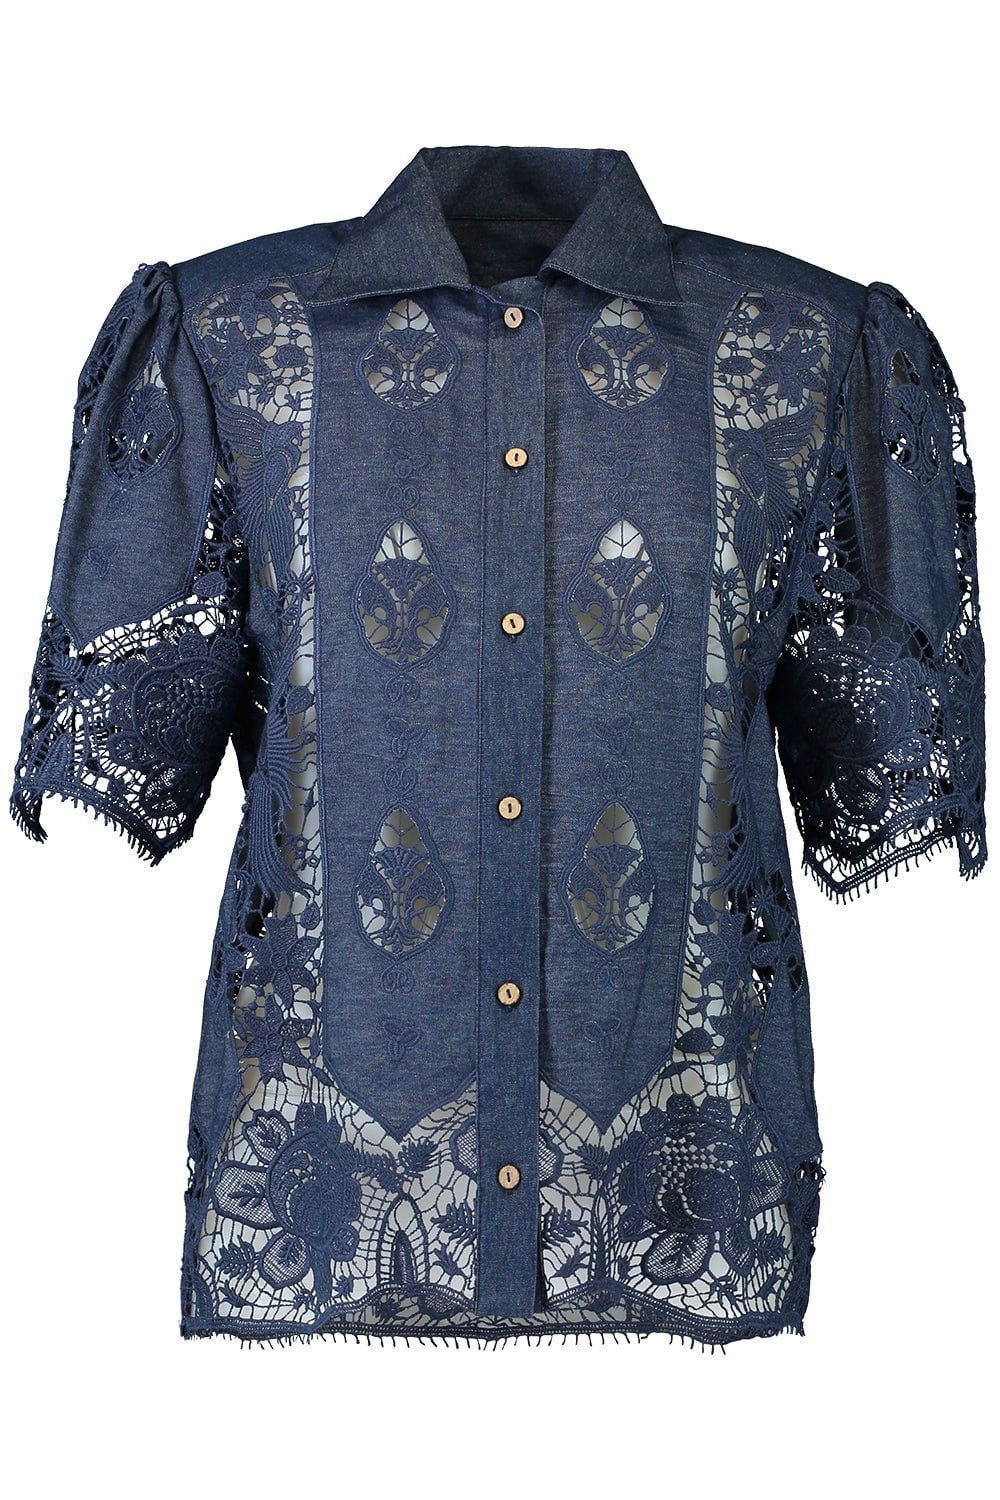 MIGUELINA-Constance Shirt-